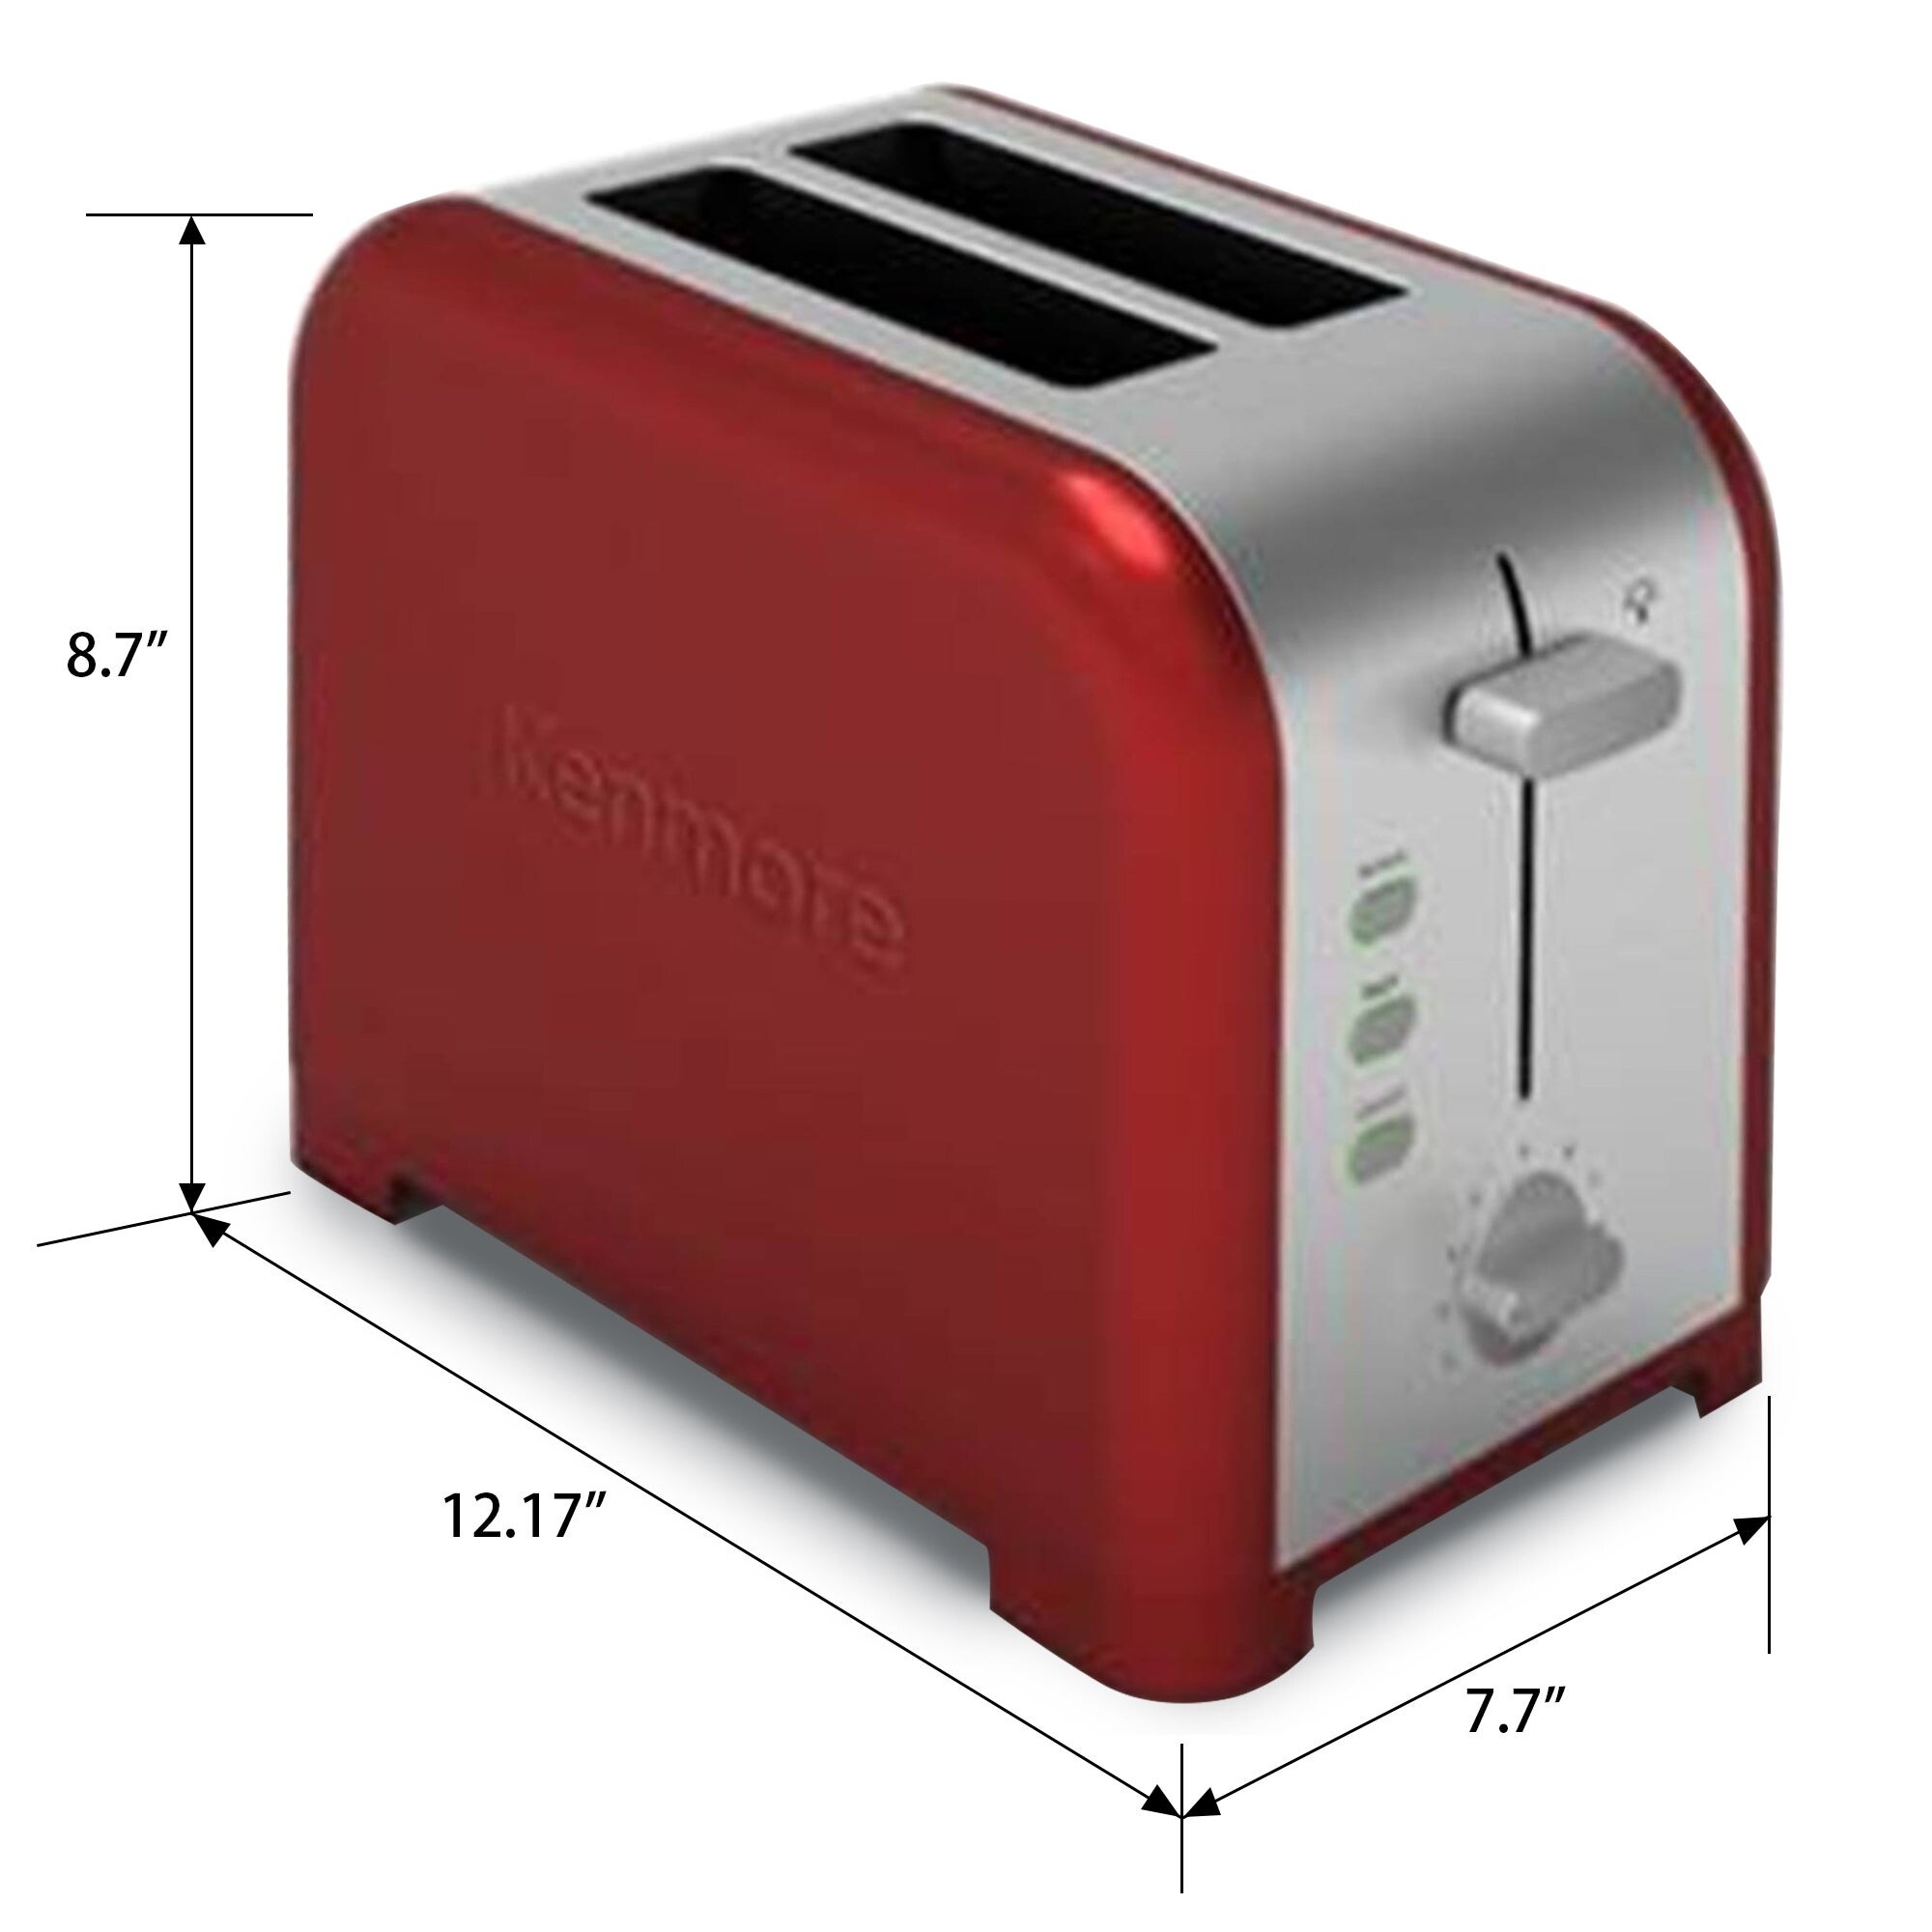 https://ak1.ostkcdn.com/images/products/is/images/direct/2c2be49a2350d437d7ffd3c35590e1a5207b1e24/Kenmore-2-Slice-Toaster%2C-Red-and-Silver-Stainless-Steel.jpg